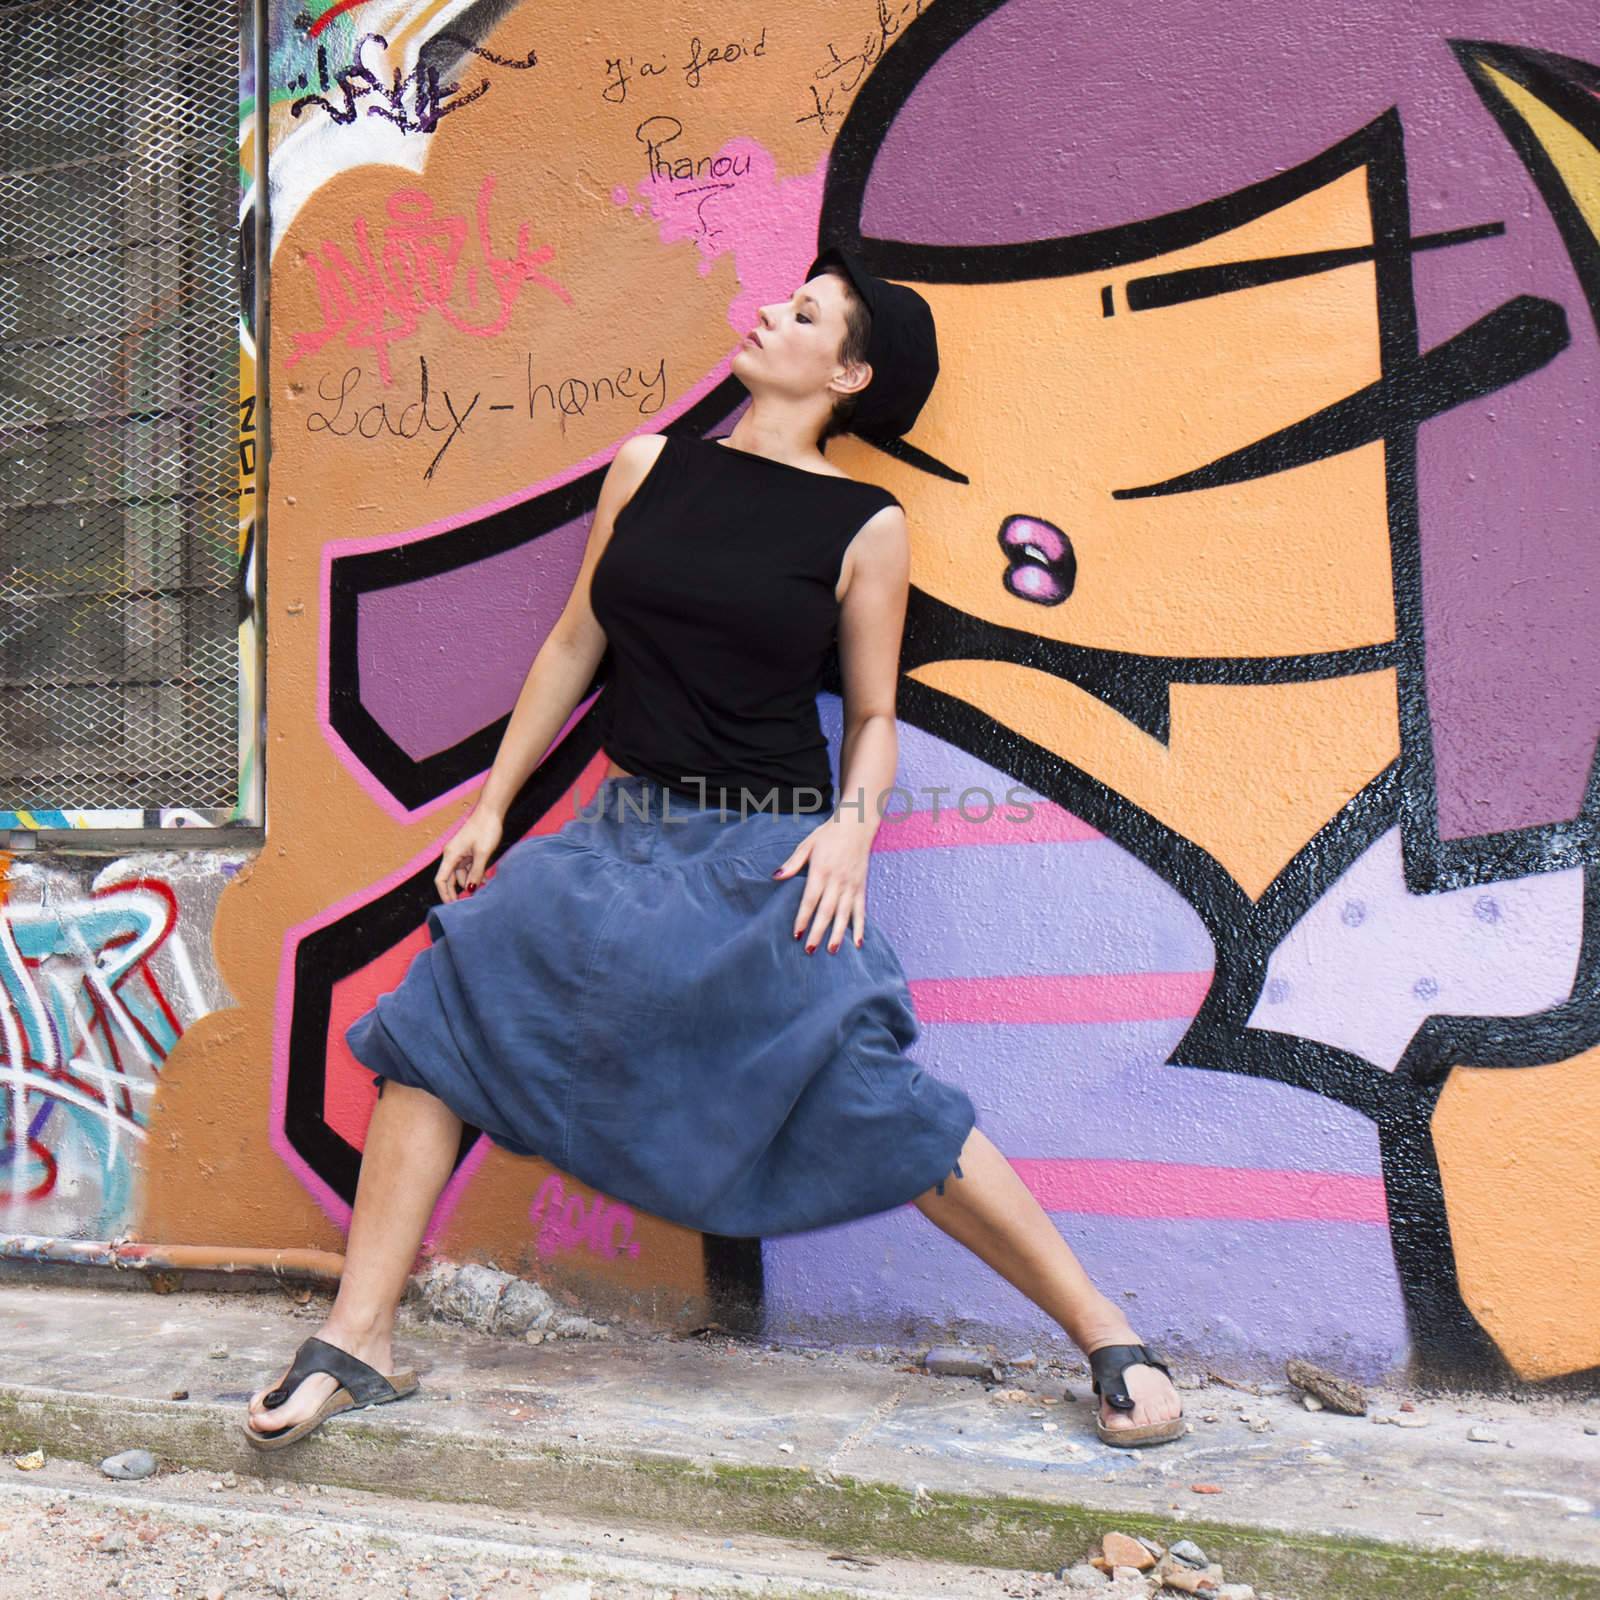 A young woman dancing in front of a wall covered in graffiti